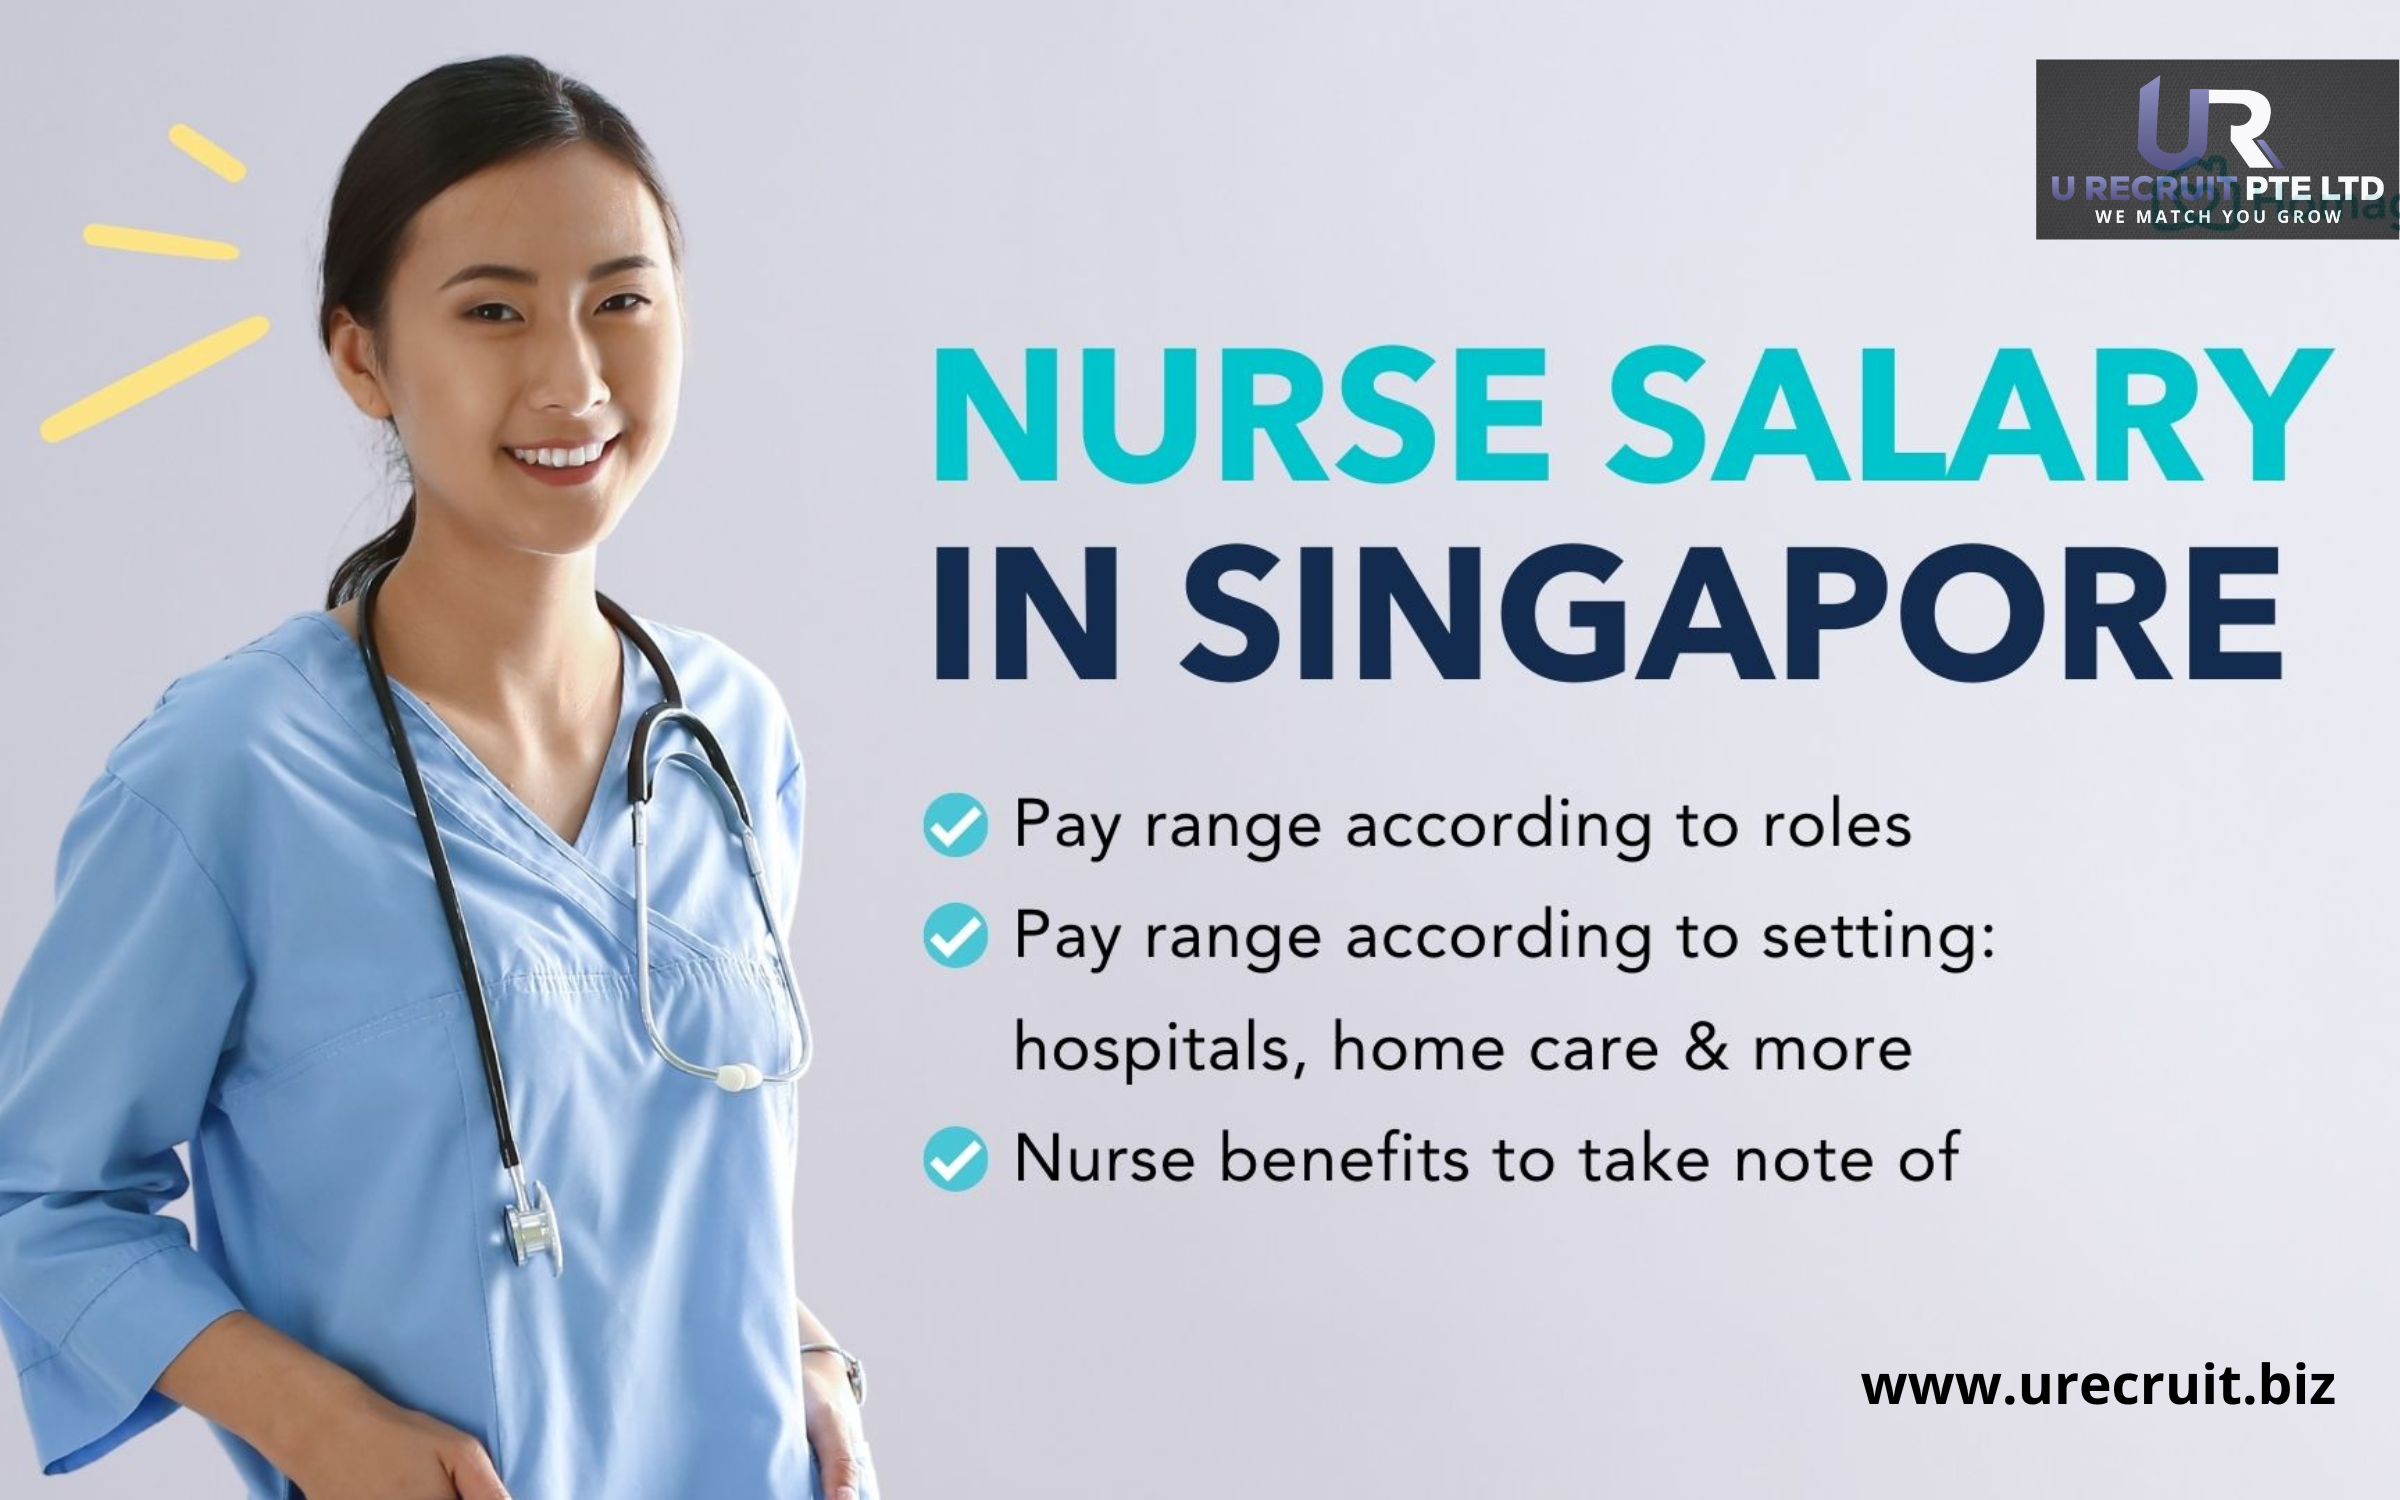 Nurse-Salary-in-Singapore_390.png